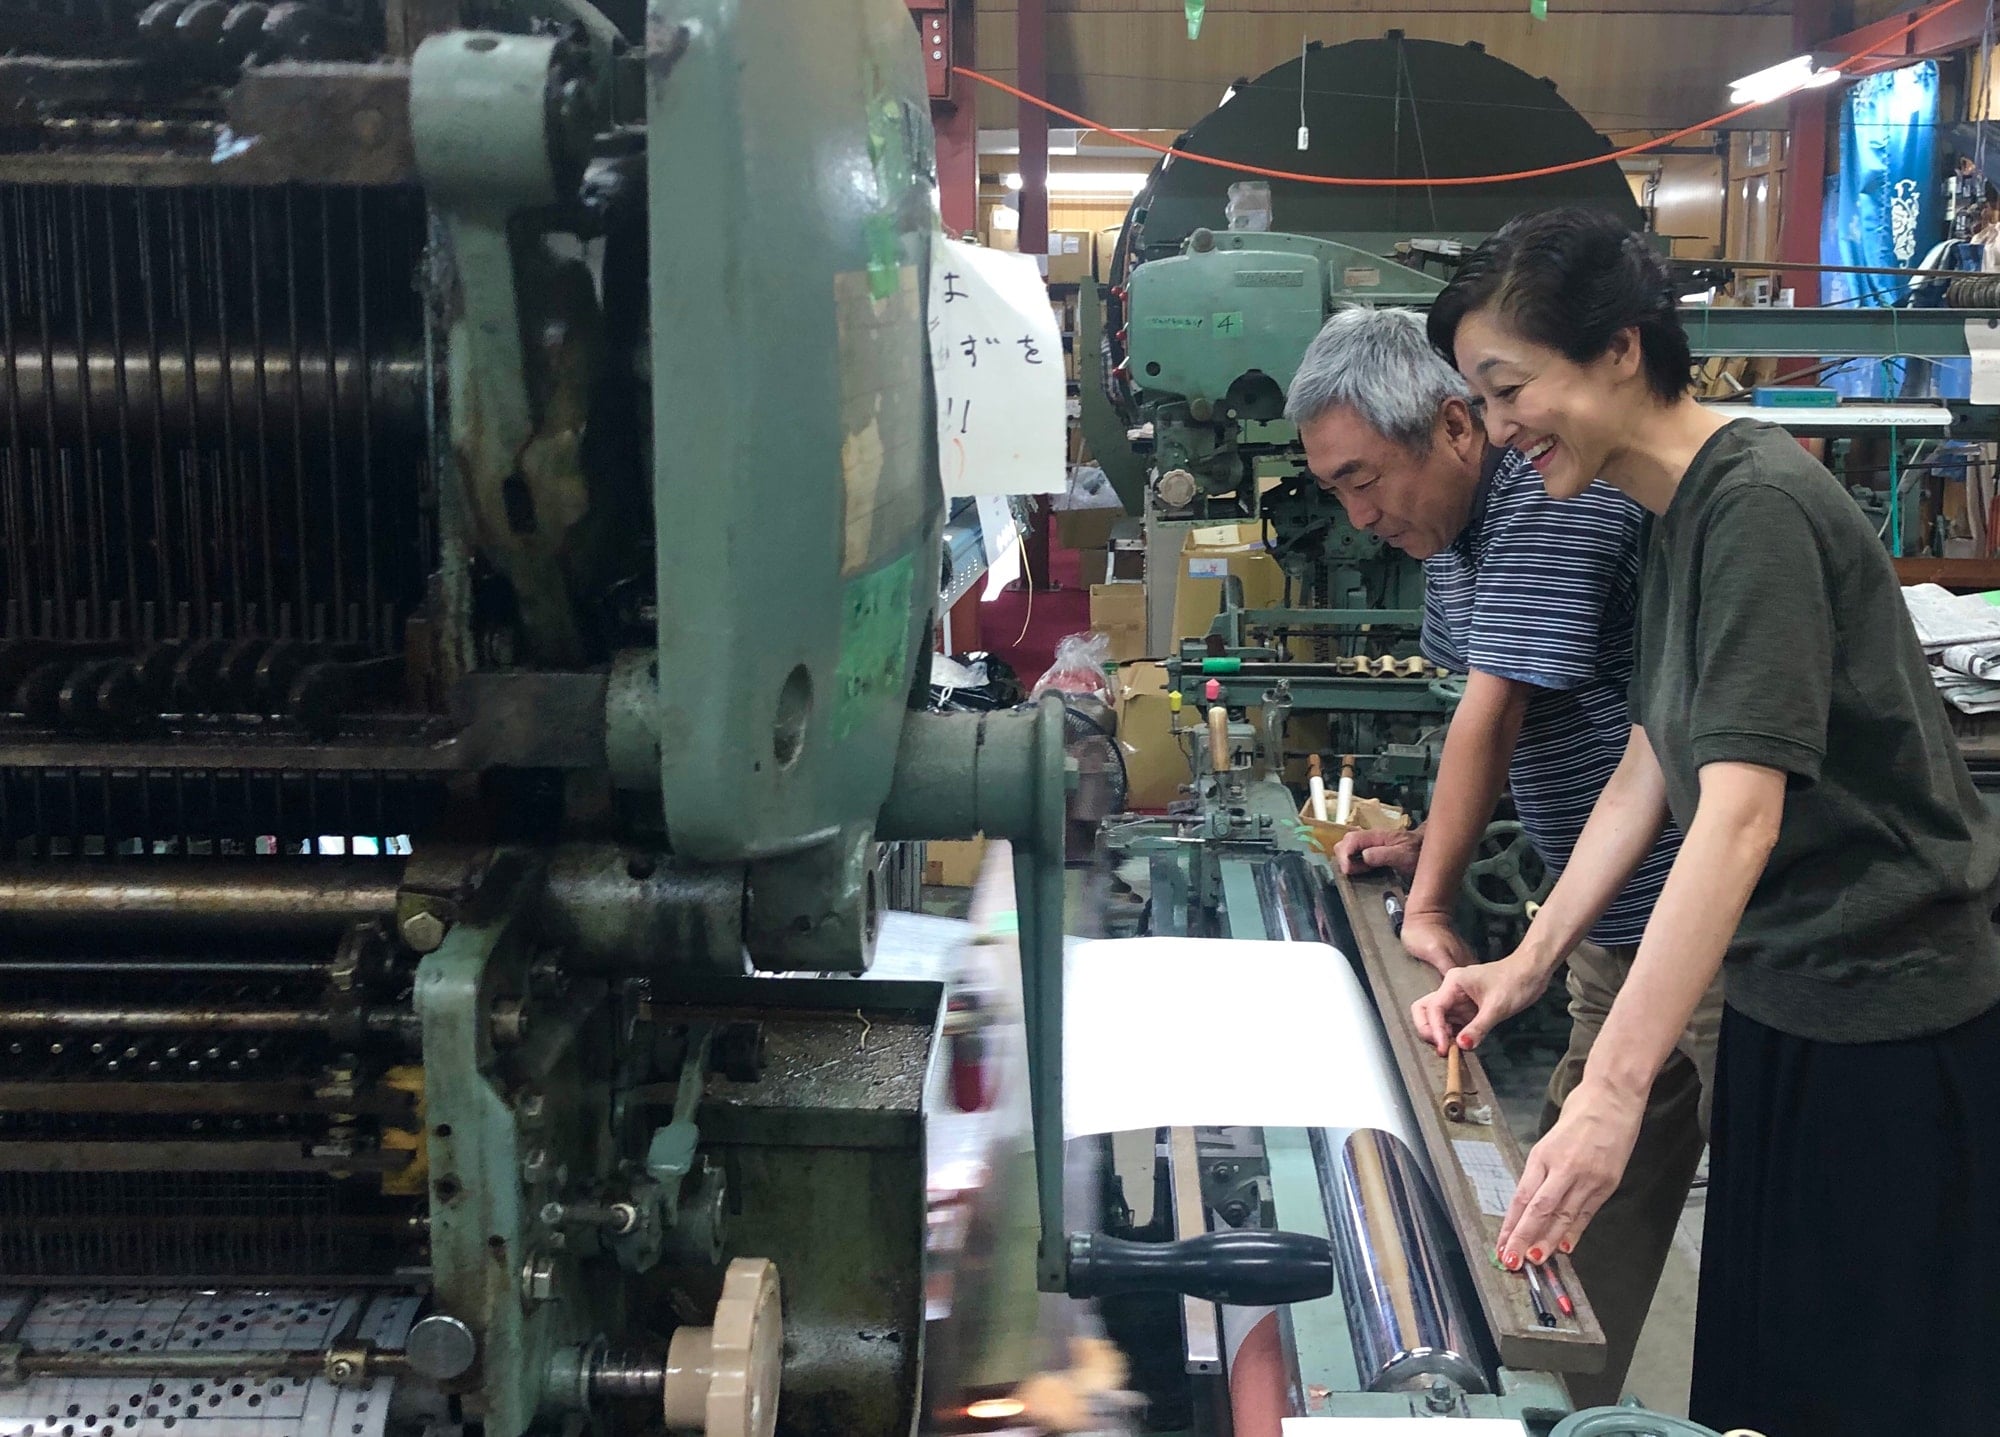 Seguchi is observing the warp thread made at the workshop in Yamanashi. “The origin of my motivation comes from the time interacting with the craftsmen”